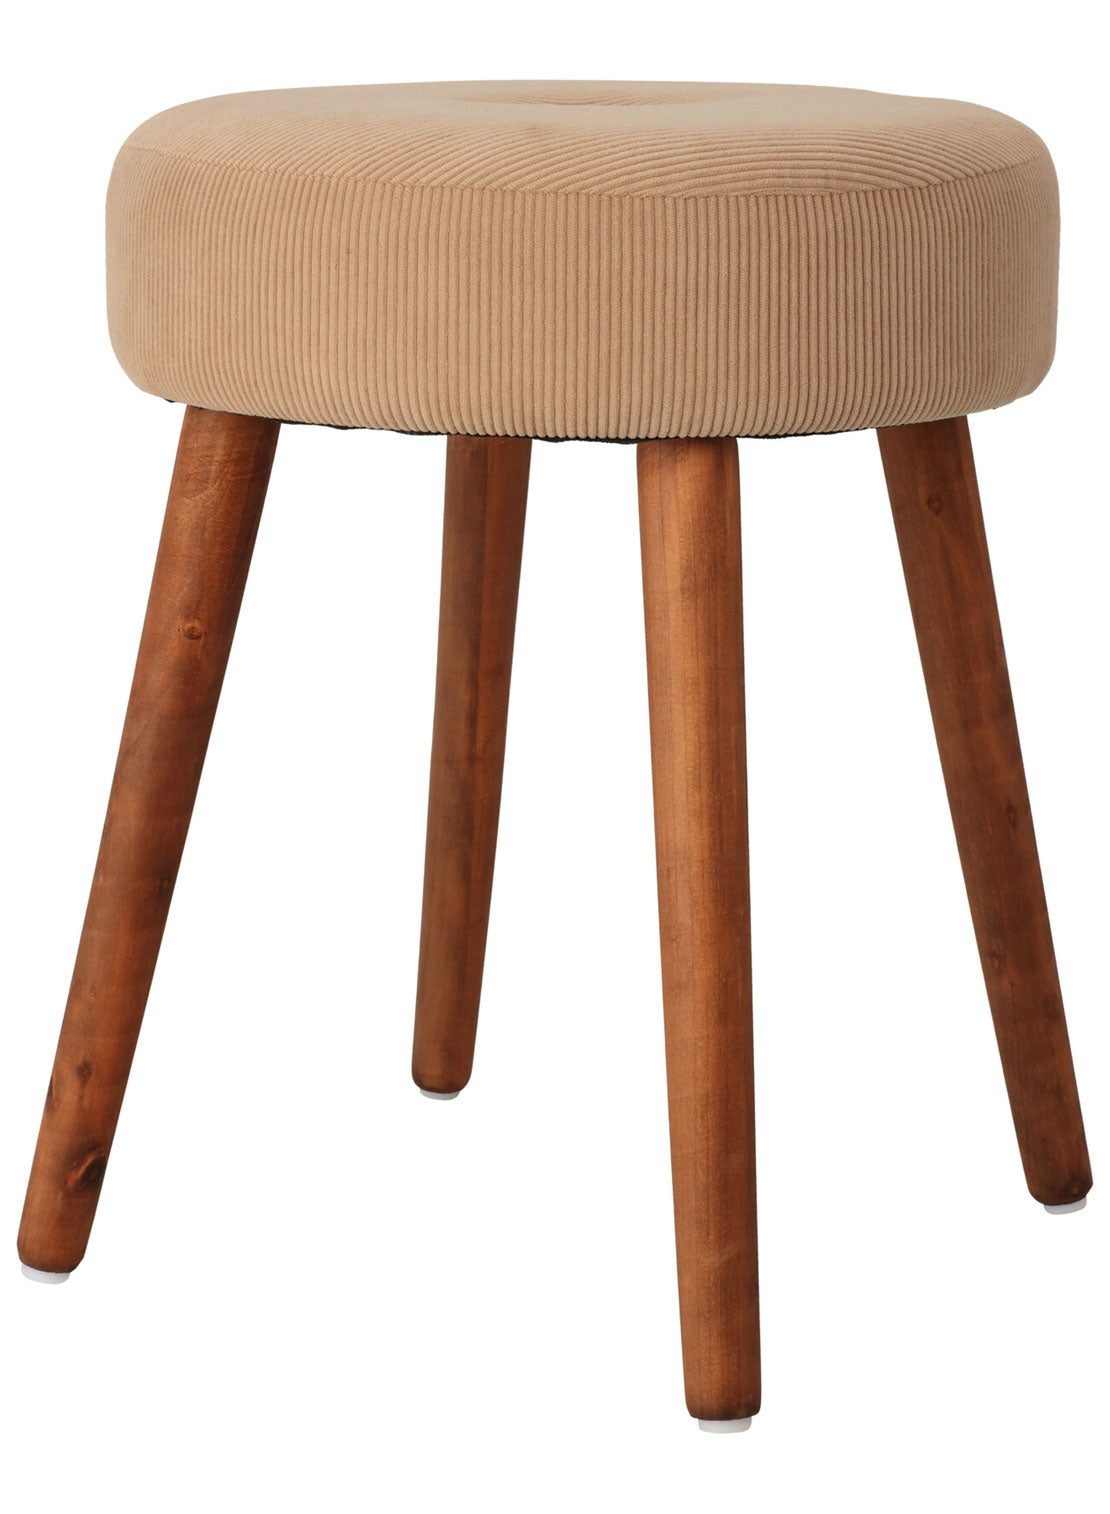 The Home Collection Corduroy Stool - Beige 1 Shaws Department Stores